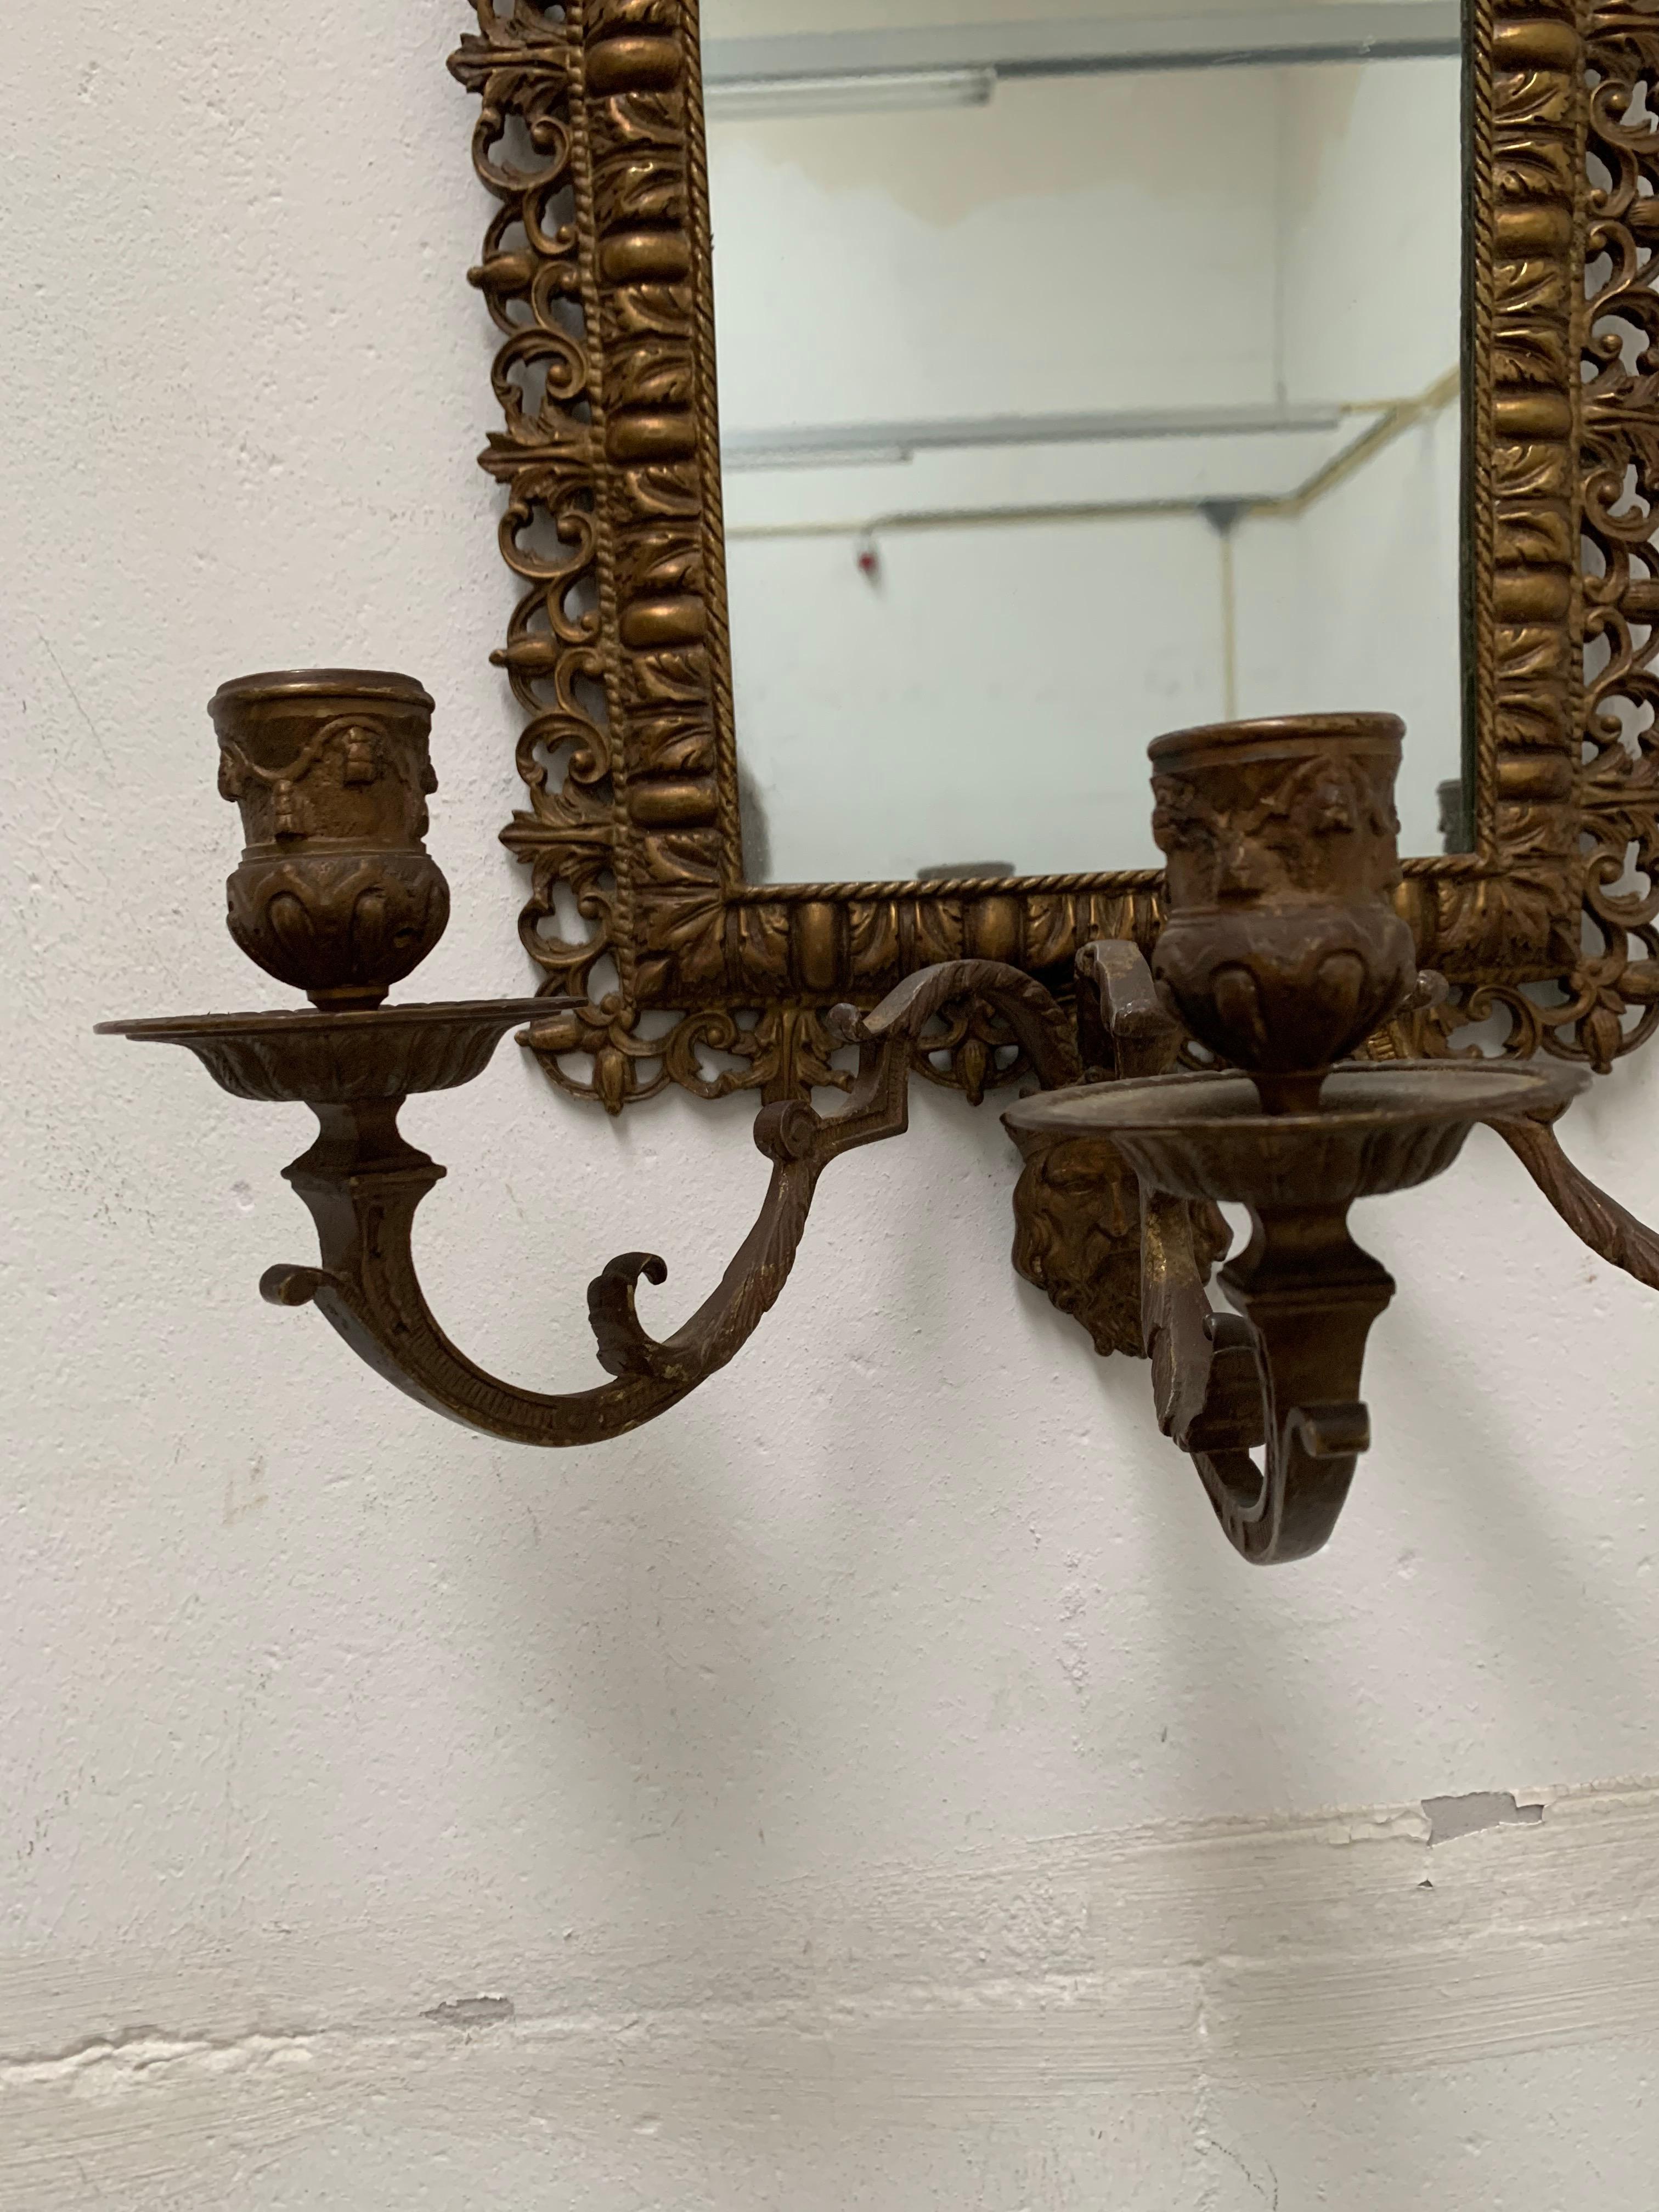 Rare Renaissance Revival Bronze Wall Mirror with Candelabras and Stunning Masks For Sale 3